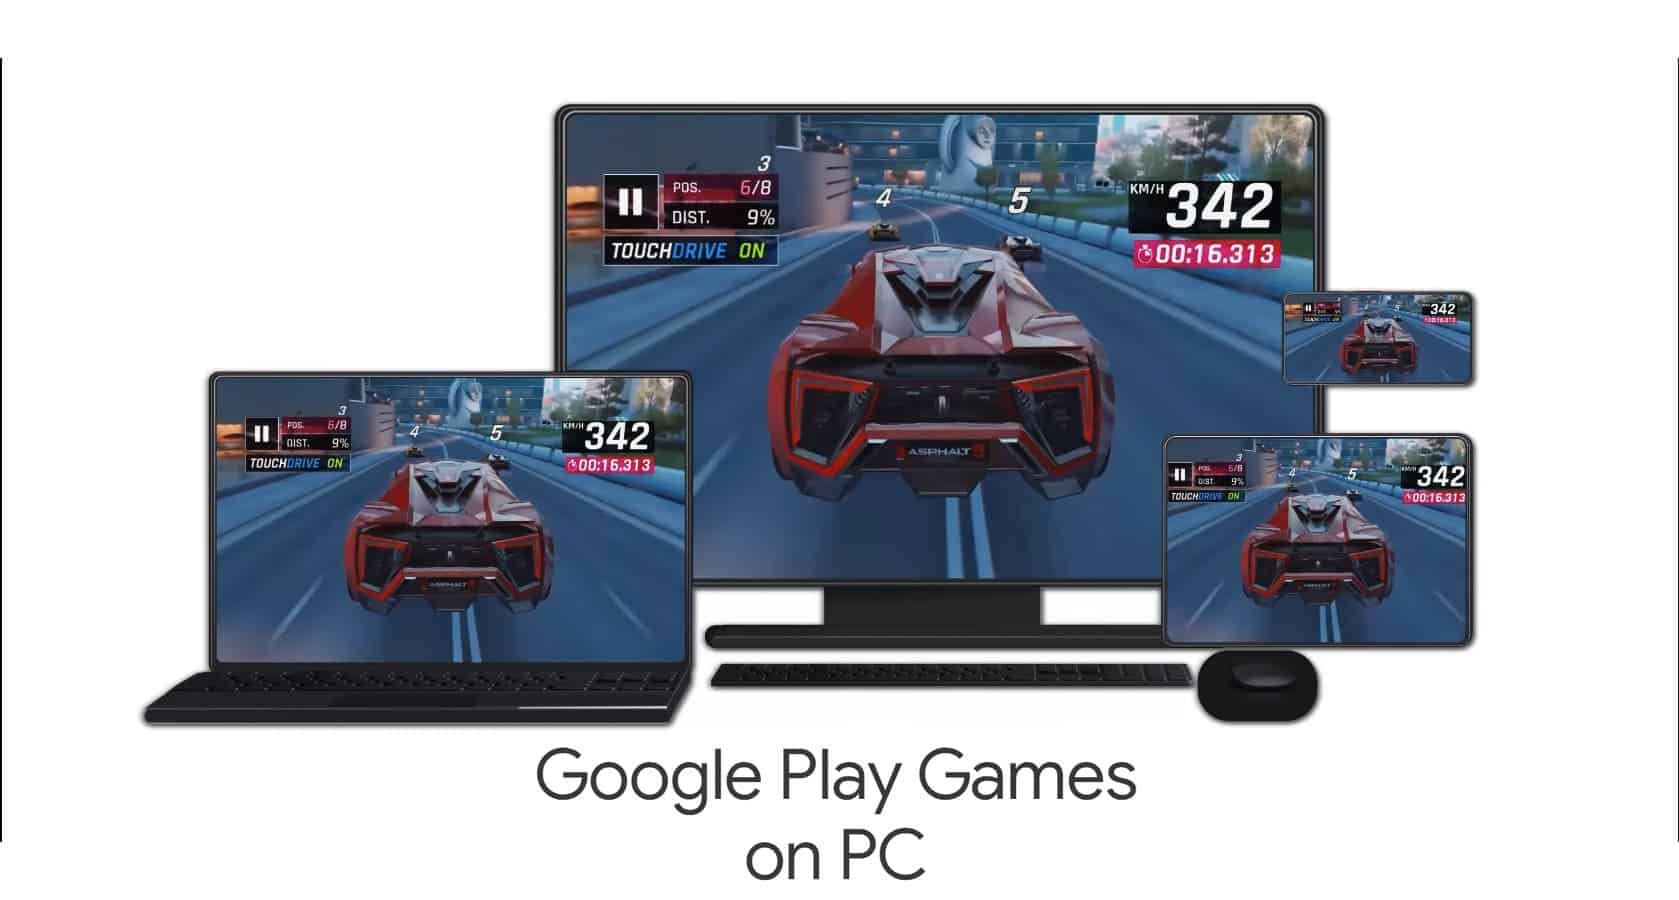 Google Play Games for PC is now available in the U.S, Canada and 6